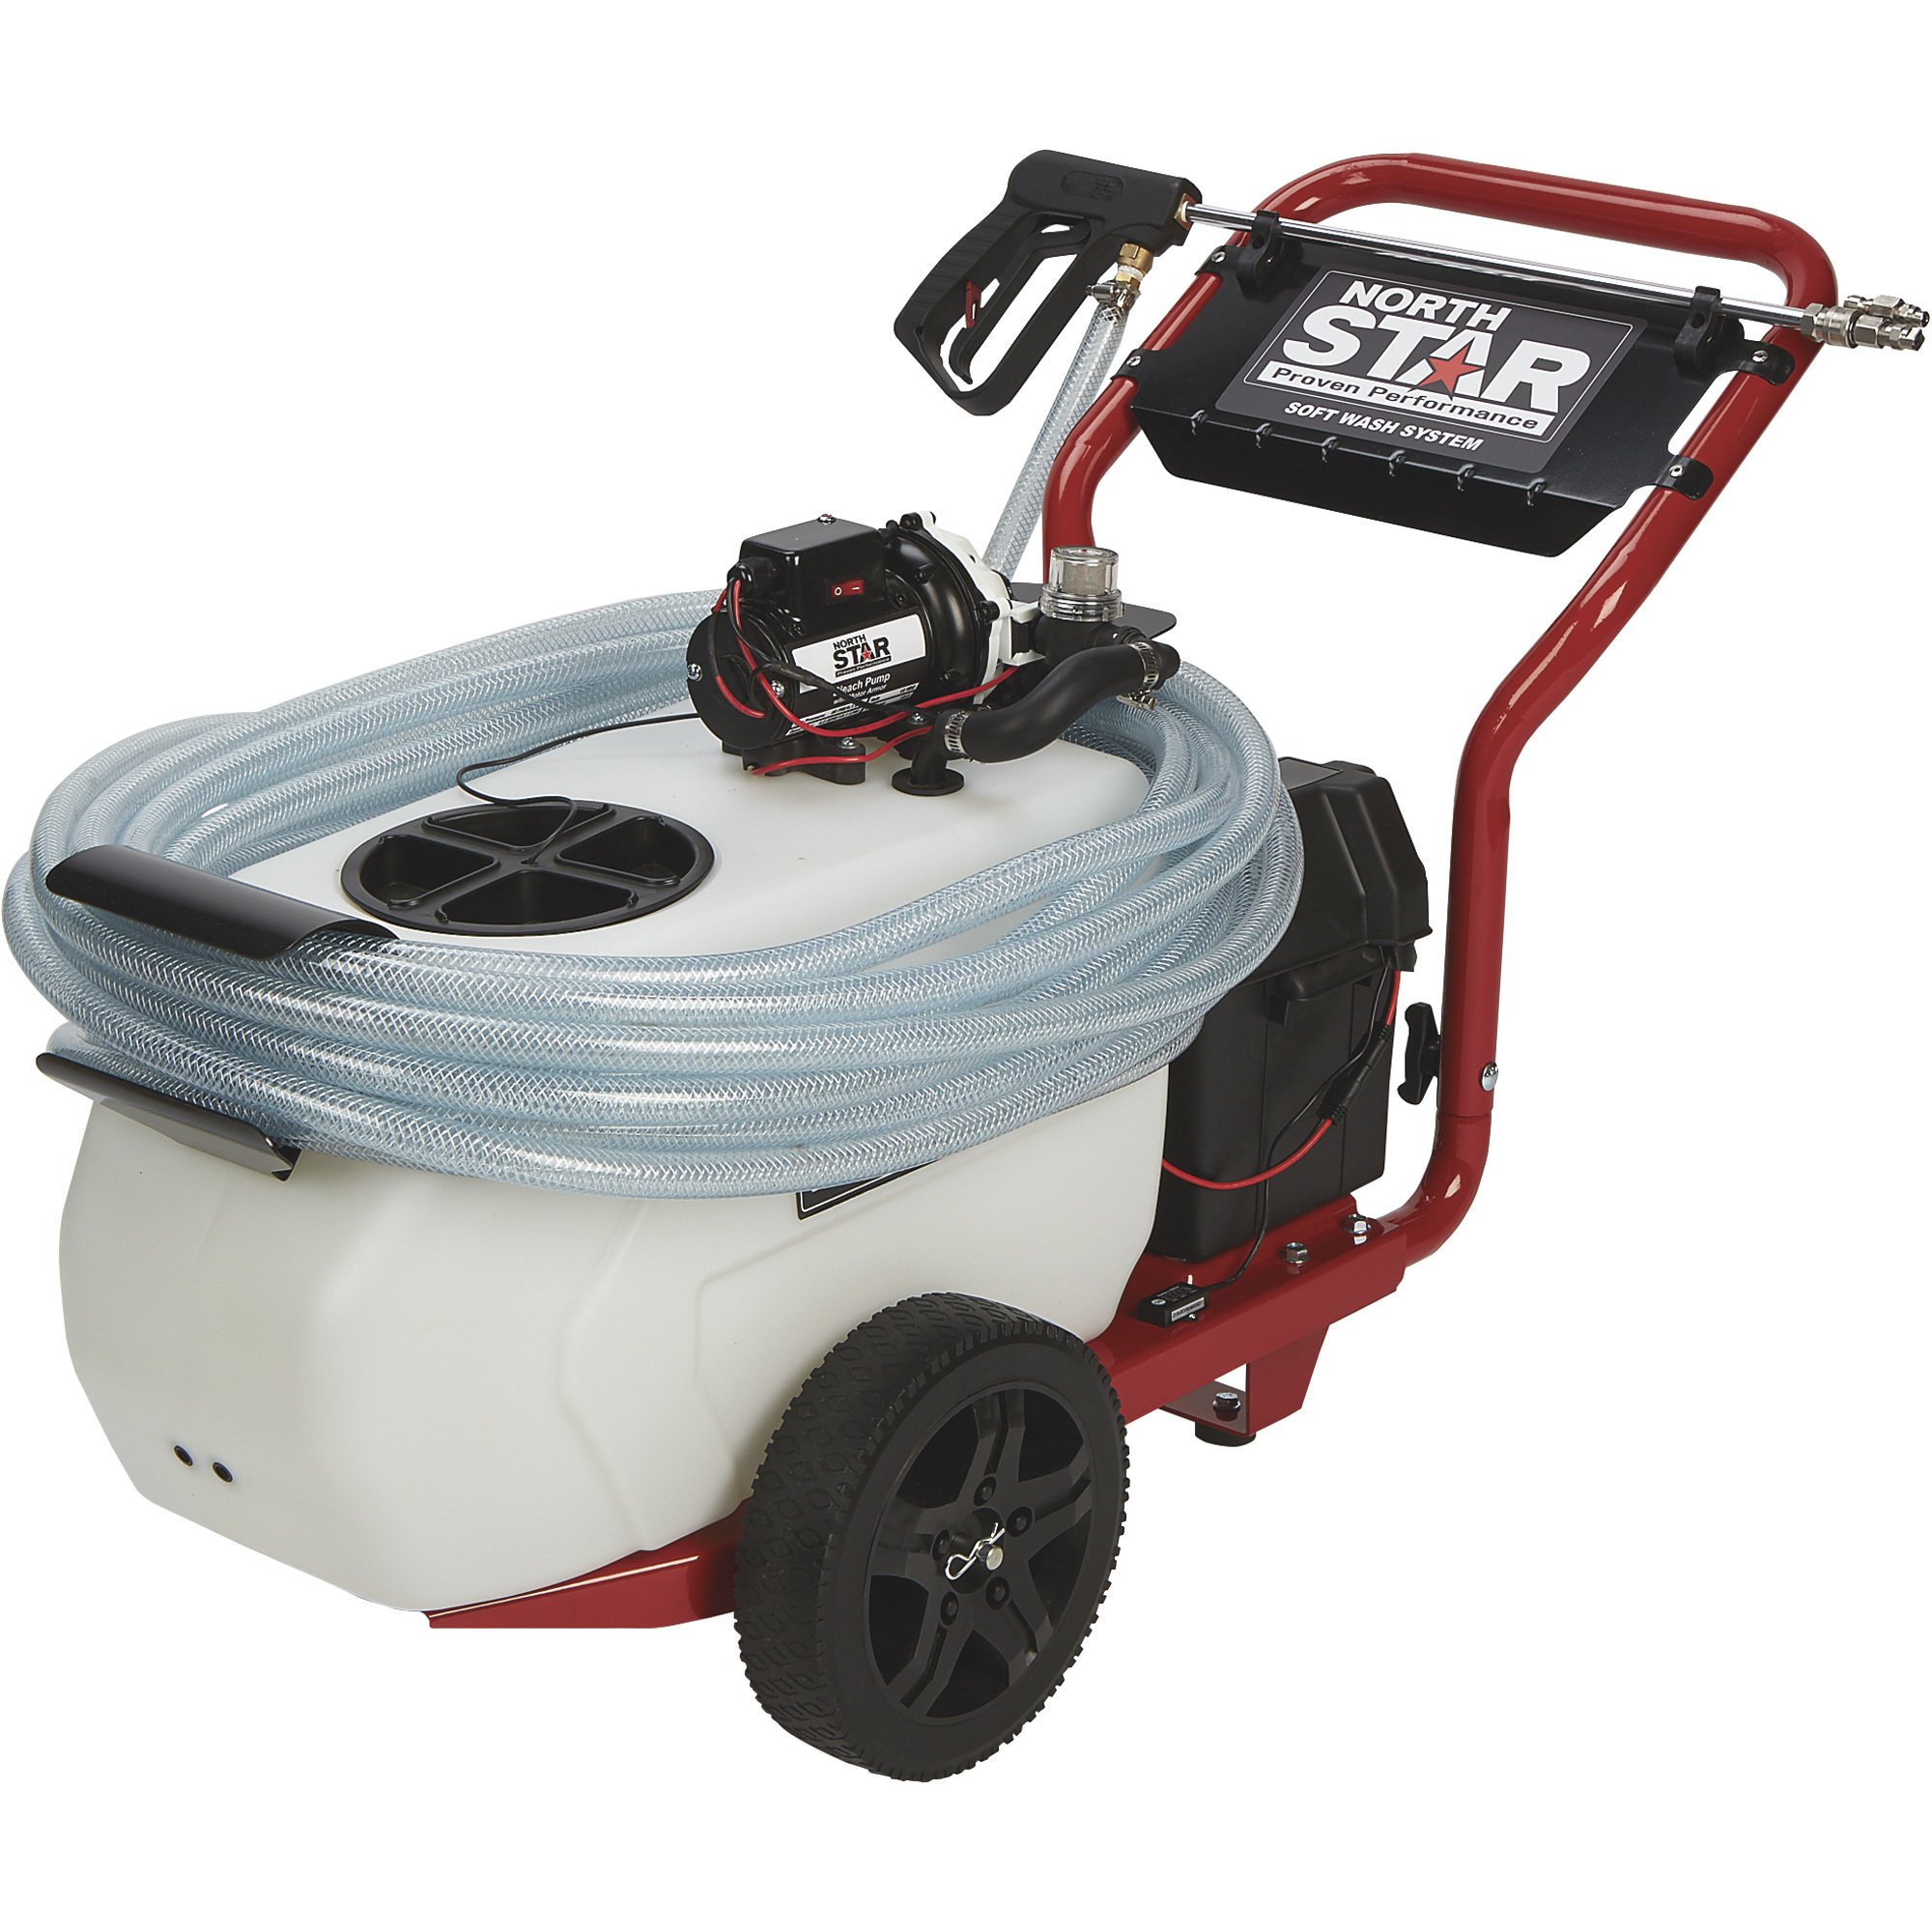 Best portable car washing machine: Up to 60% off on various models and  brands